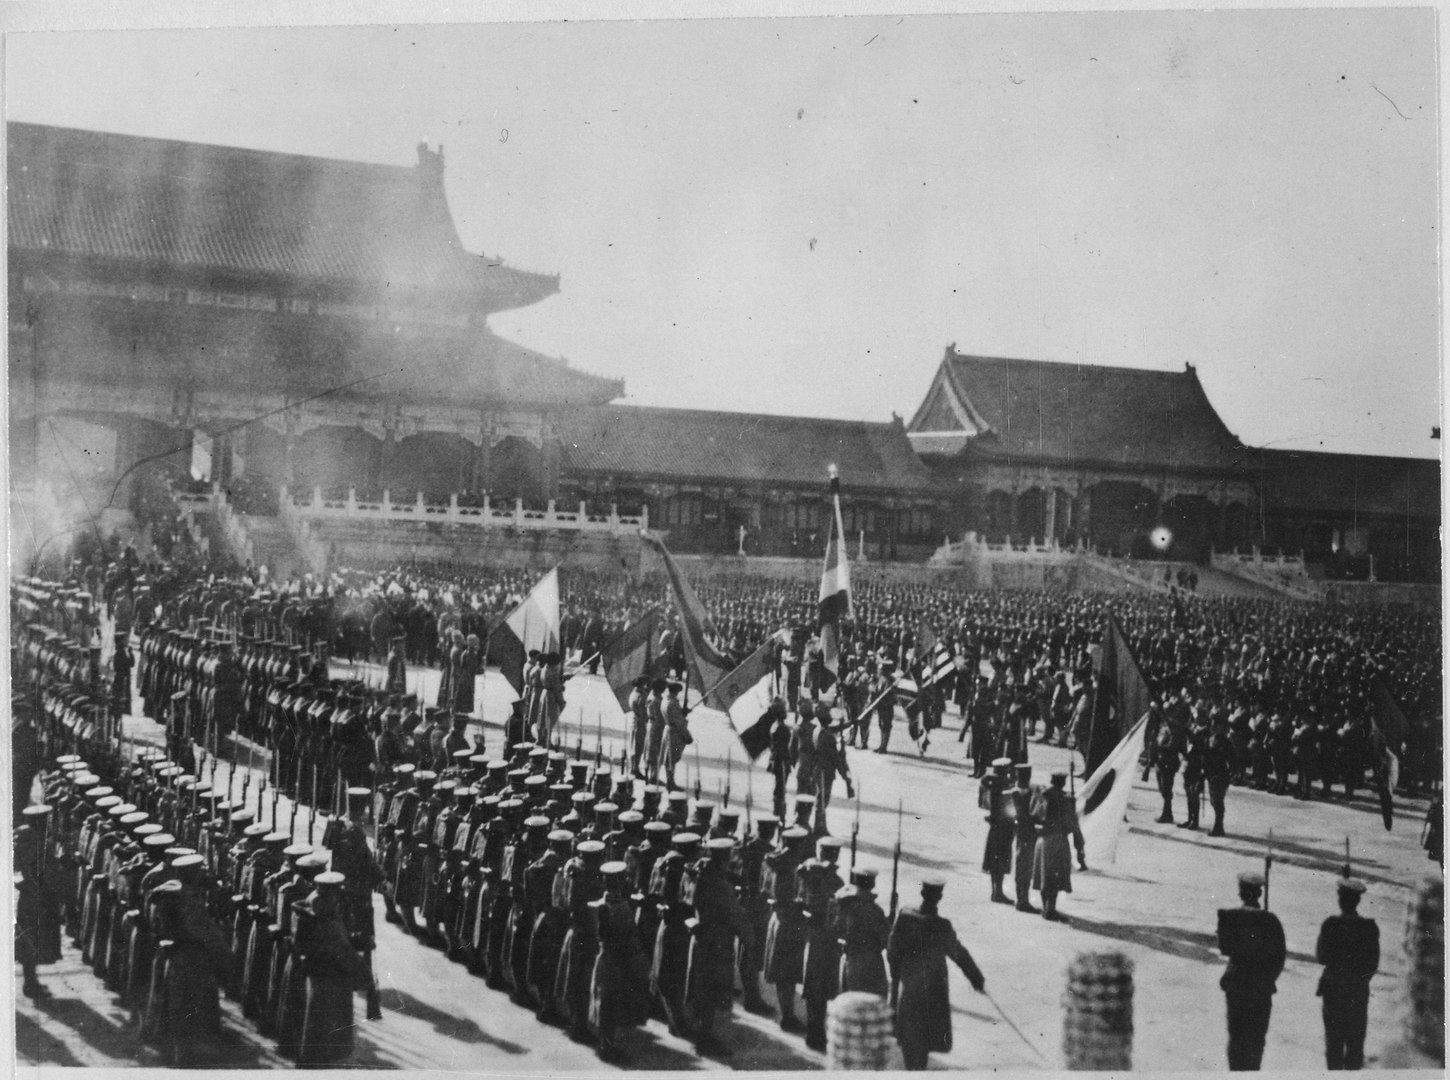 Western armies parade at the Forbidden City in China, ca. 1900.